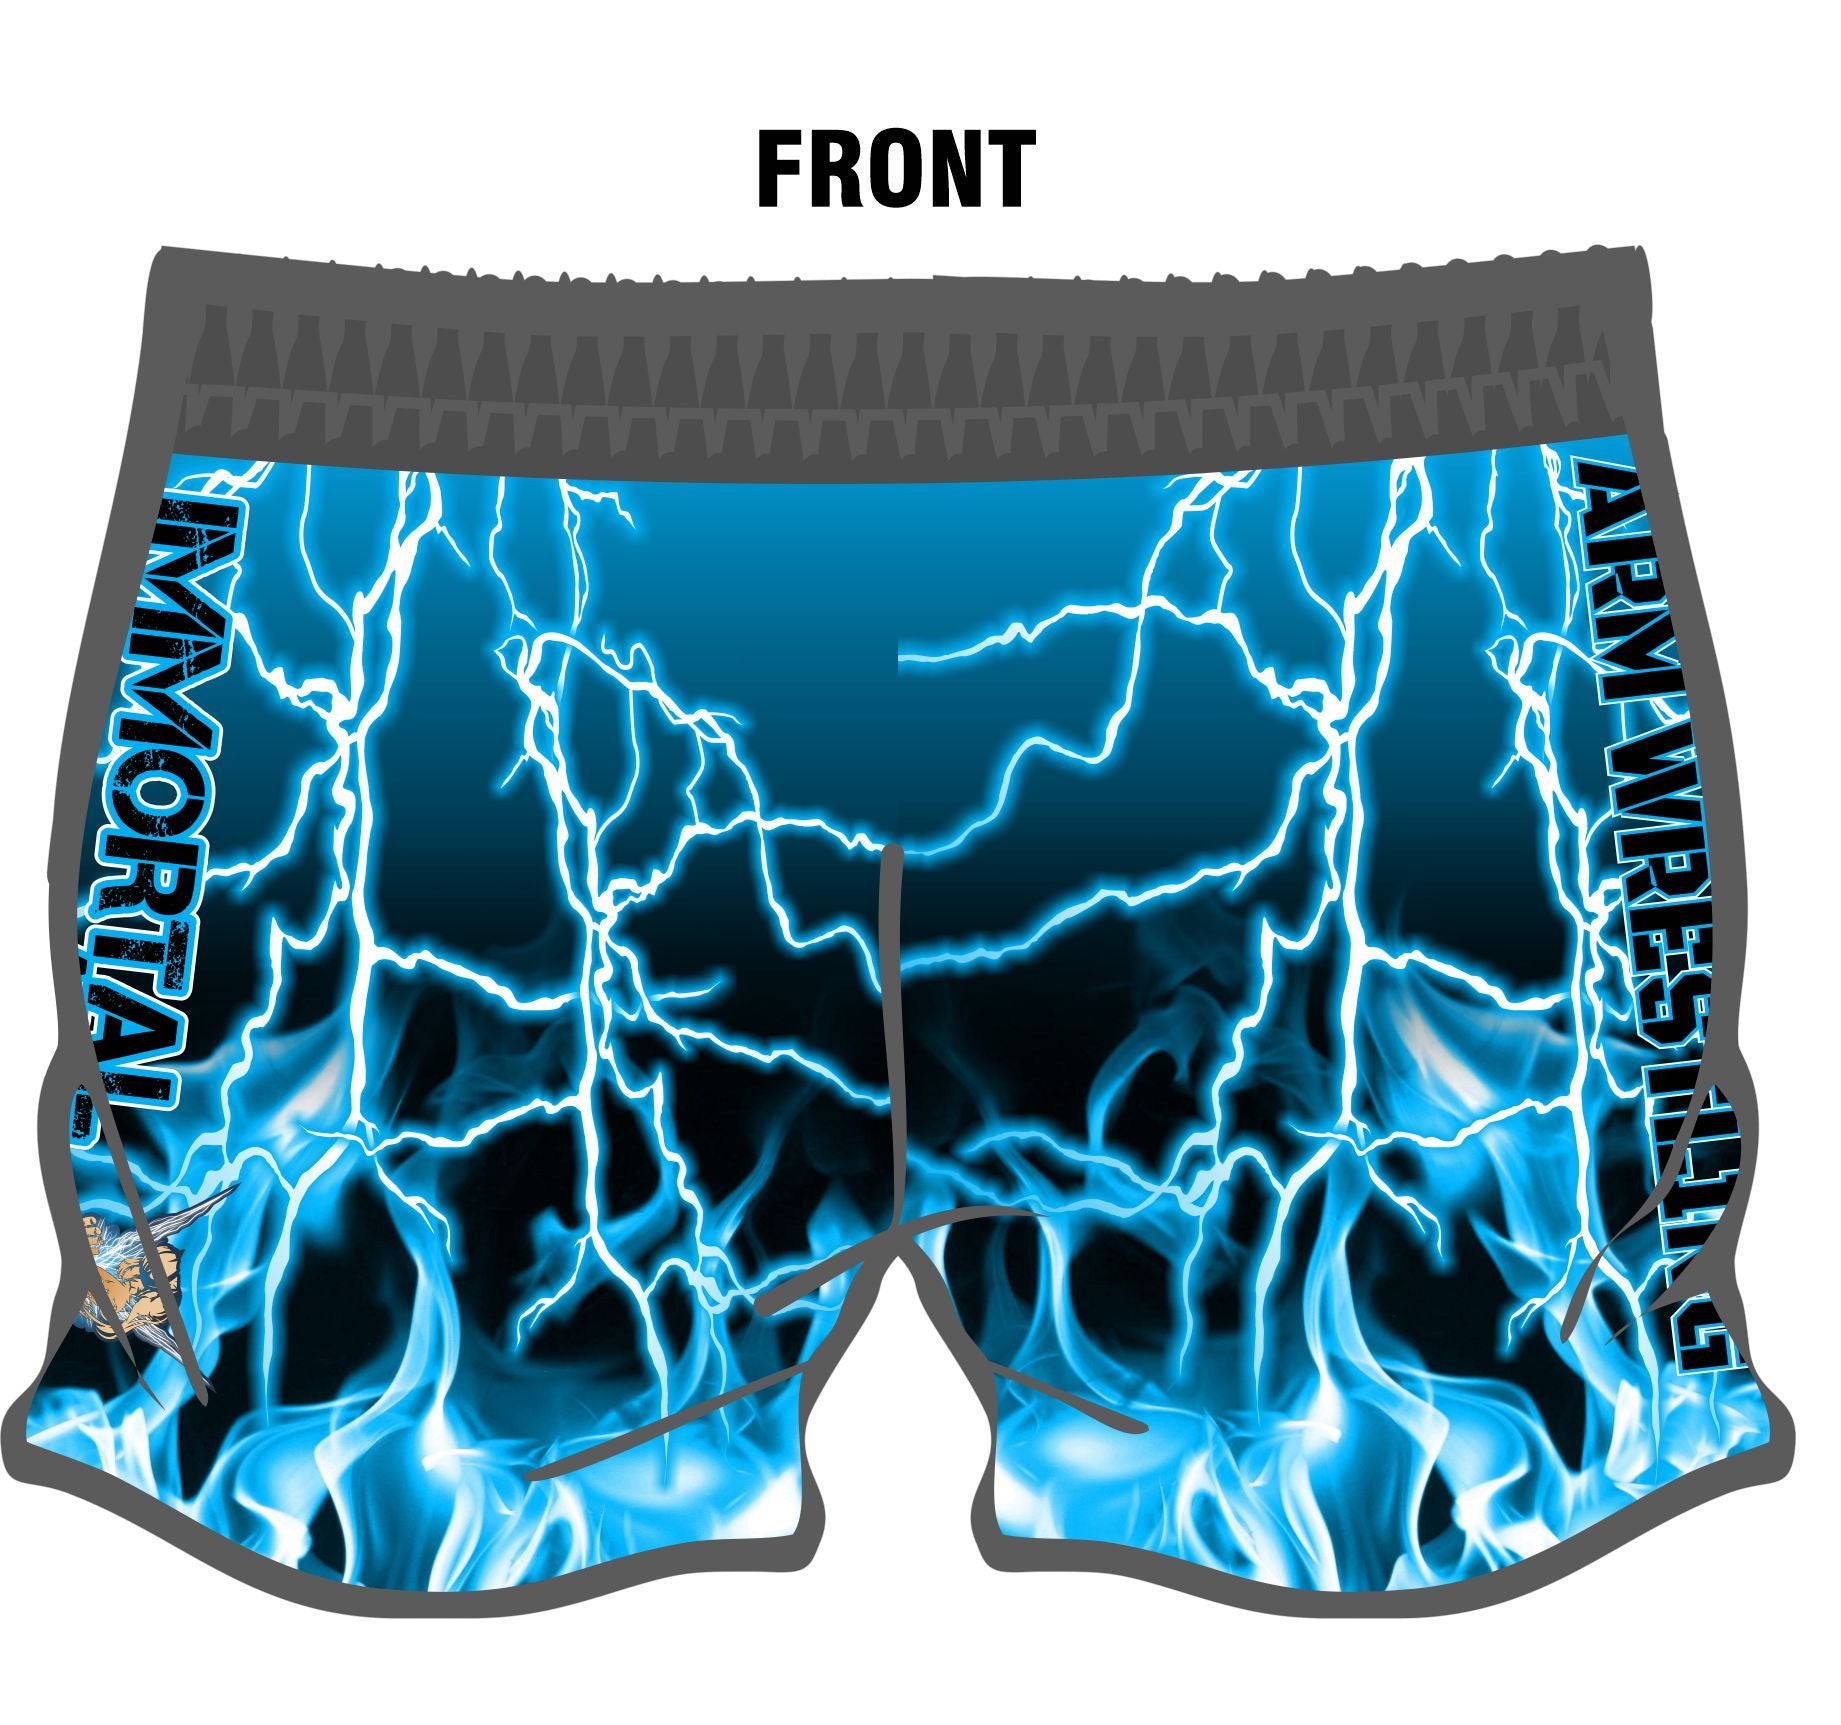 Immortal Arms gym shorts